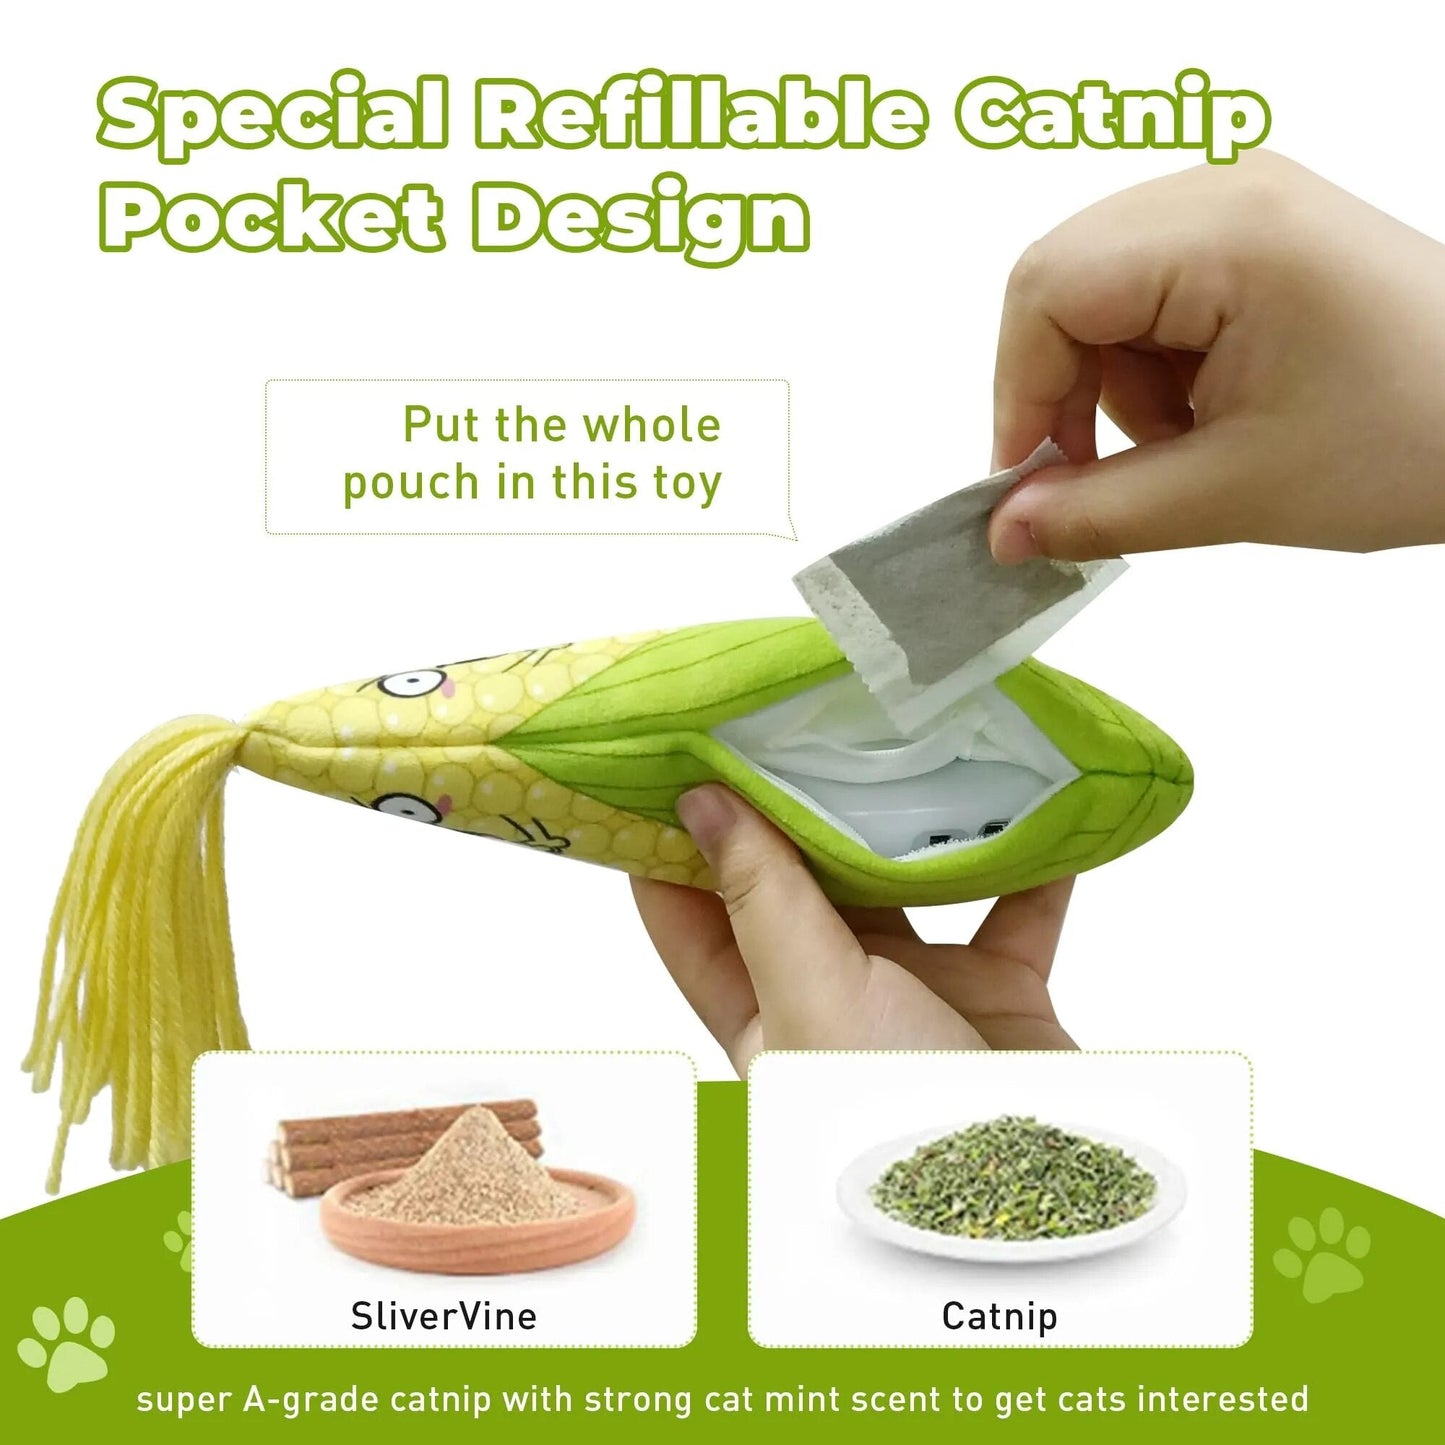 Plush Flopping Corn Toy for Dogs and Cats, 9" | 22 cm